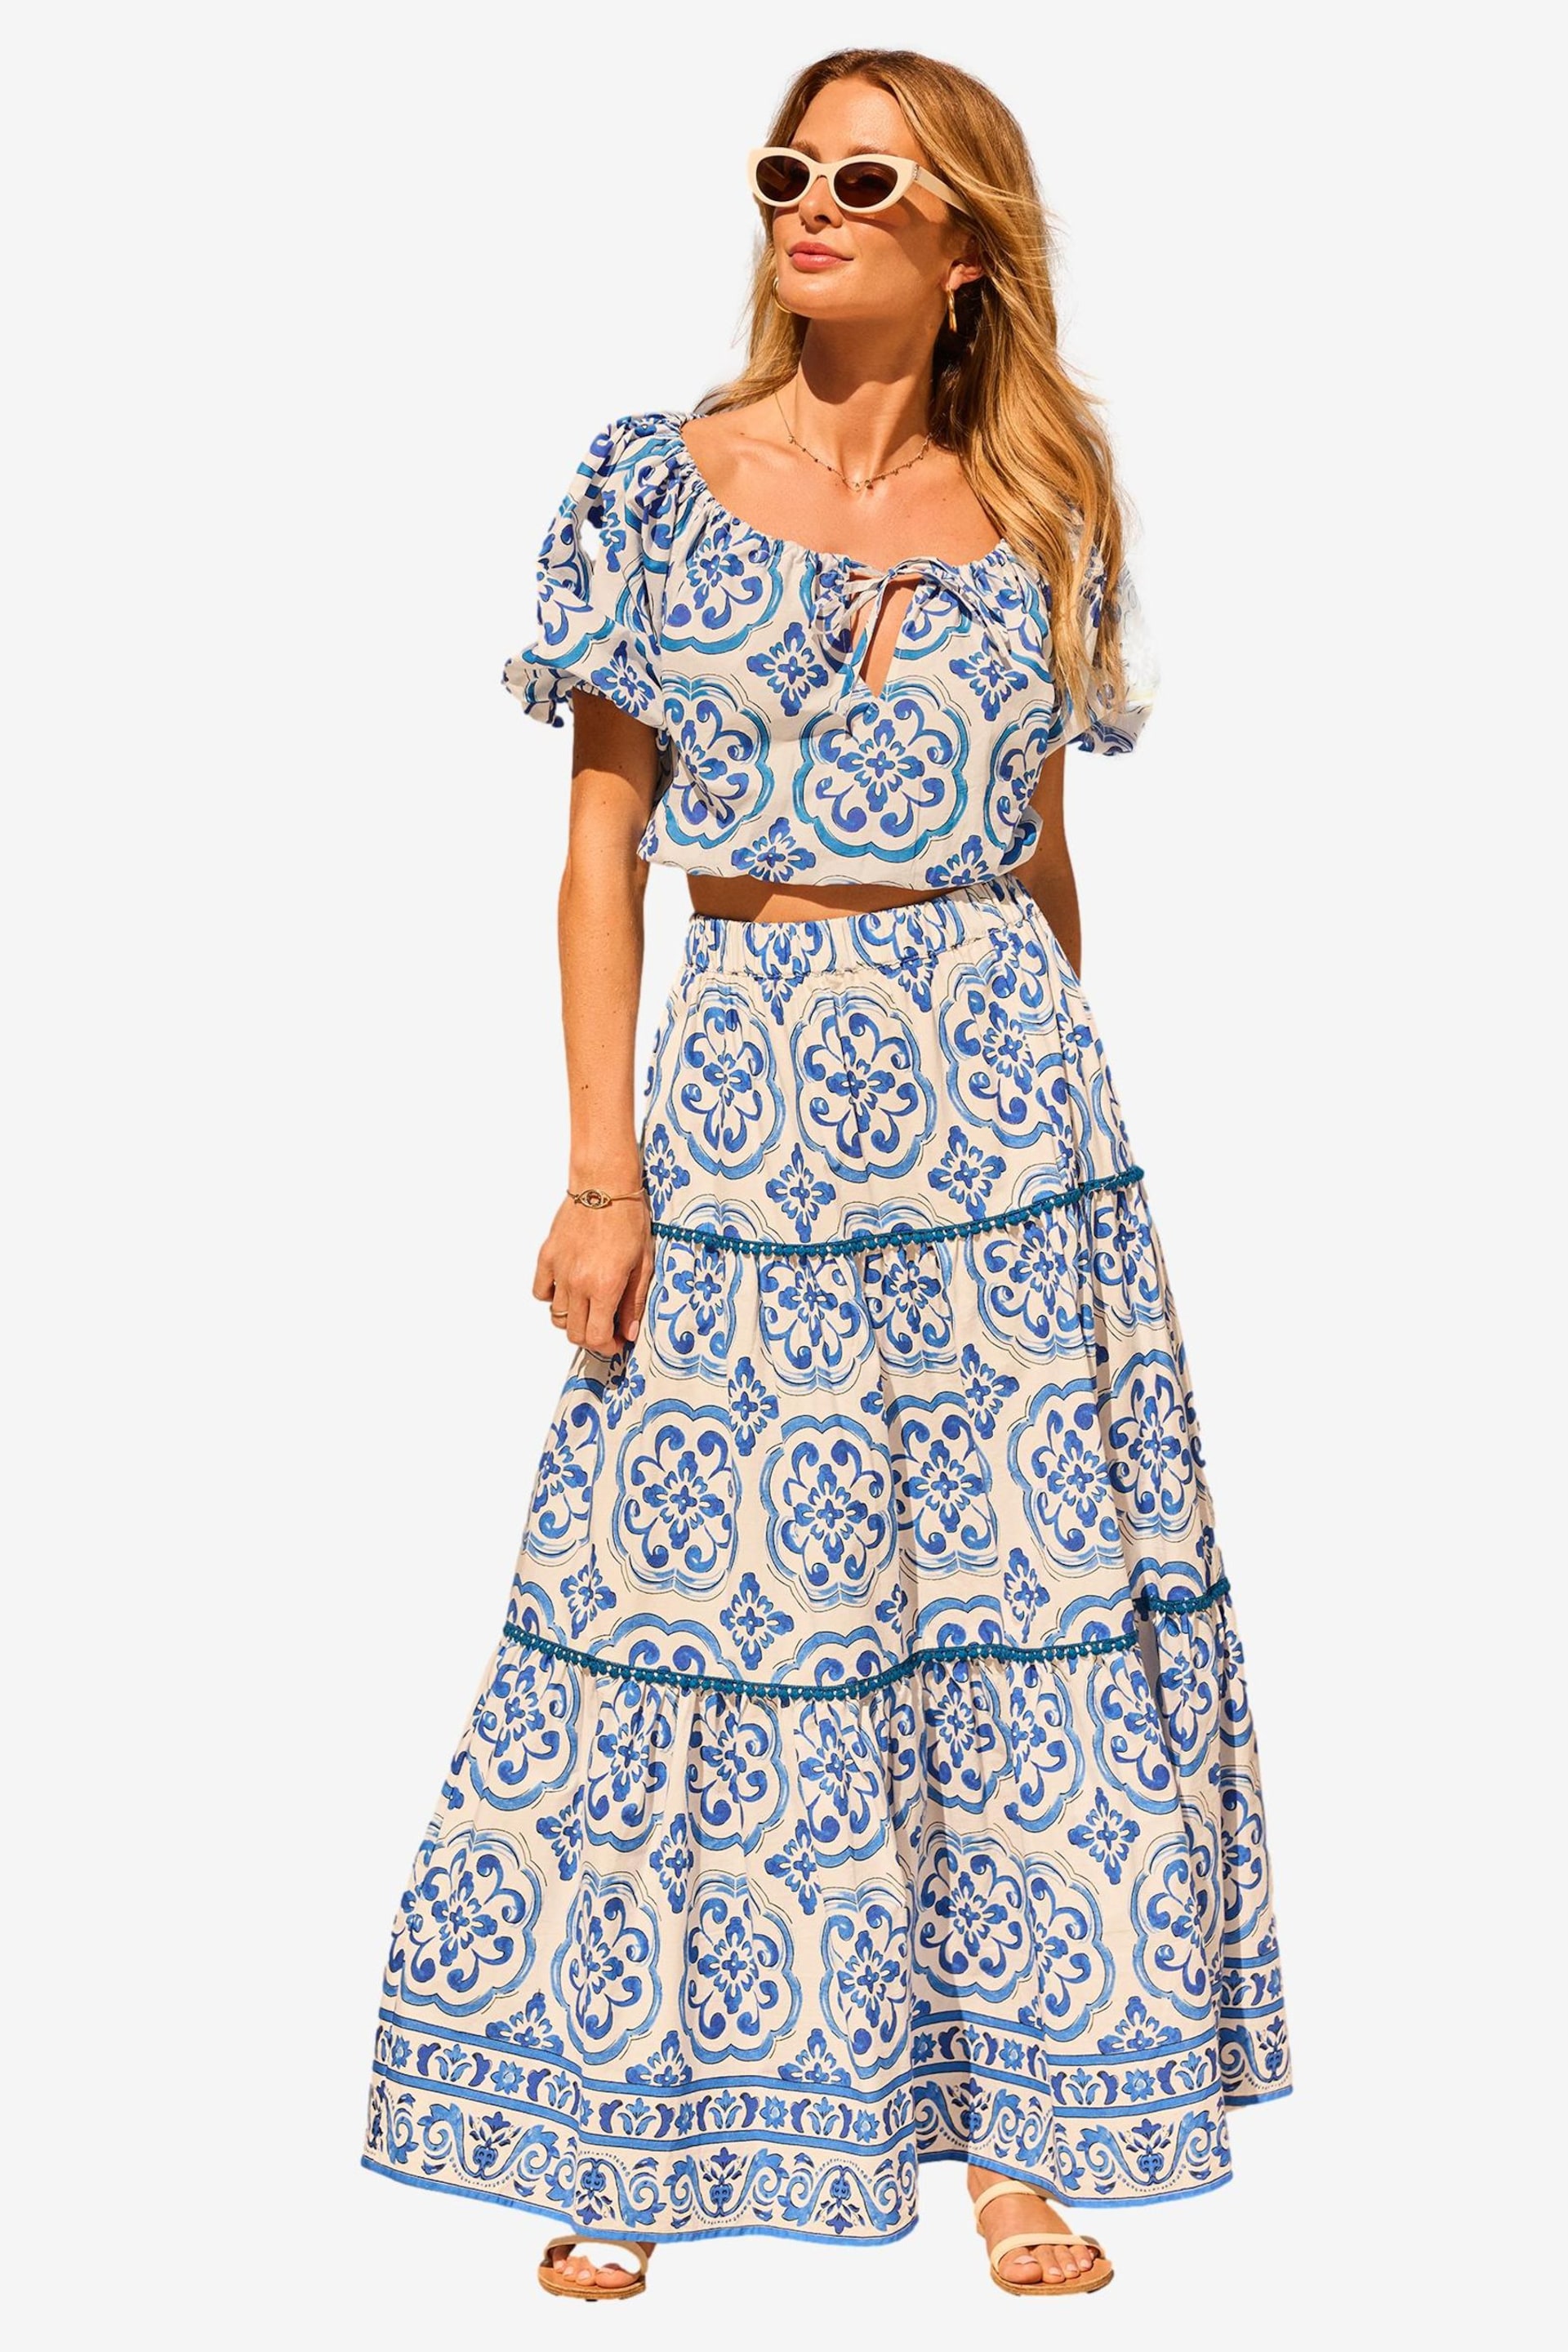 Friends Like These Blue Floral Tiered Cotton Maxi Skirt - Image 5 of 5